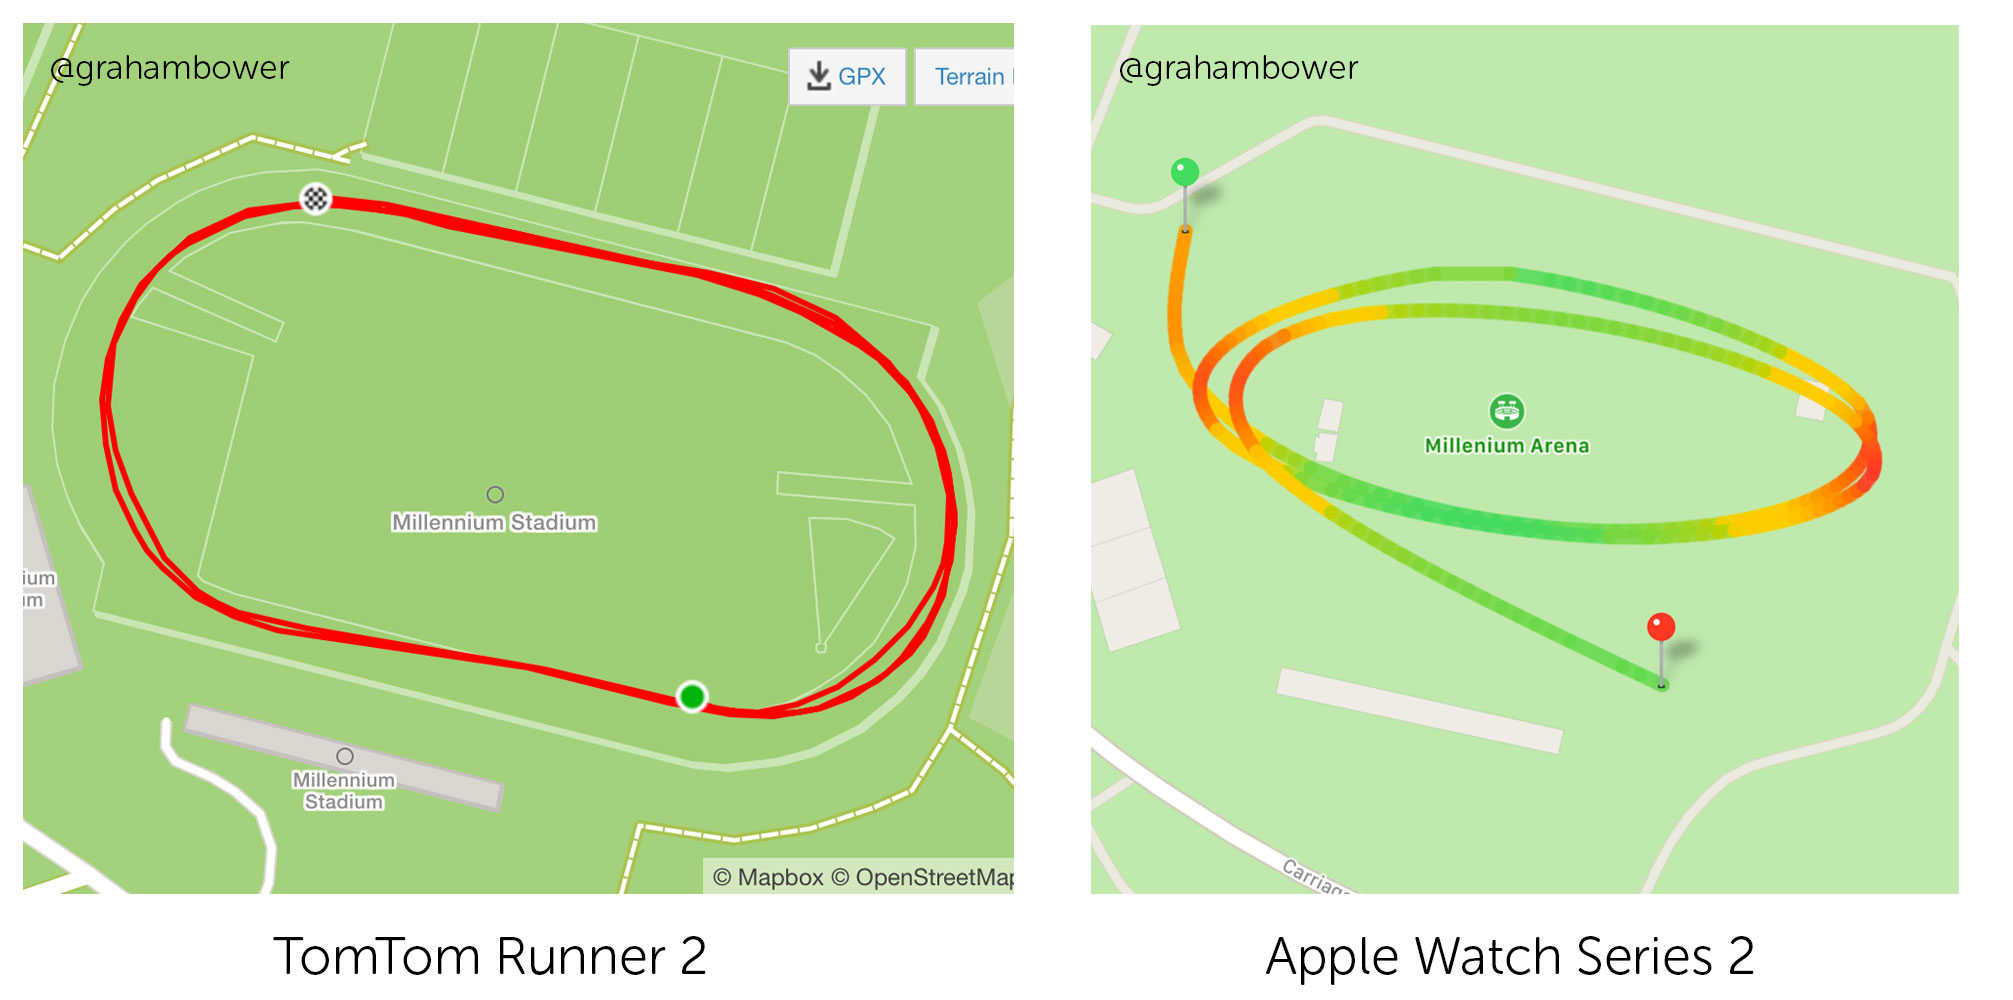 Apple Watch Series 2 couldn't keep up with TomTom when route mapping the running track